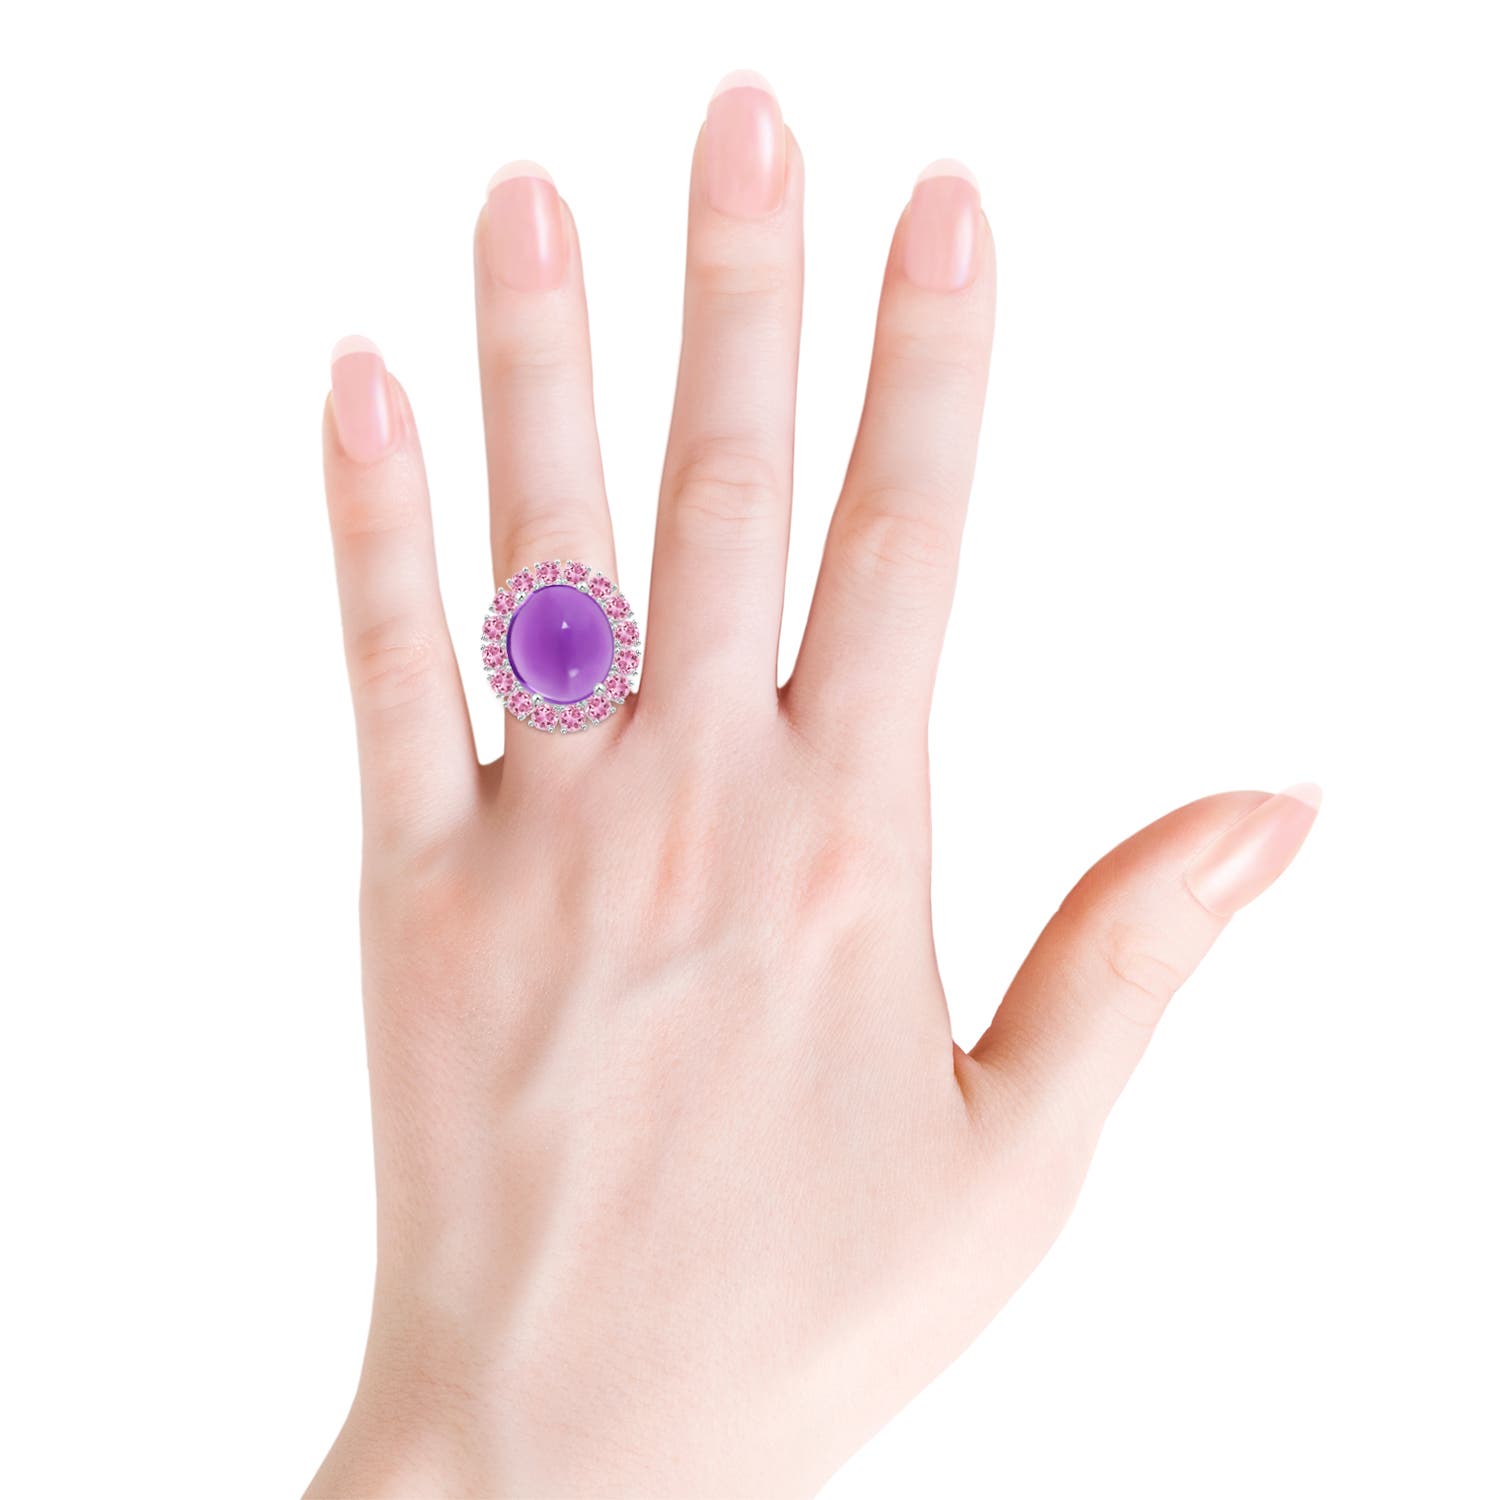 AA - Amethyst / 13.56 CT / 14 KT White Gold